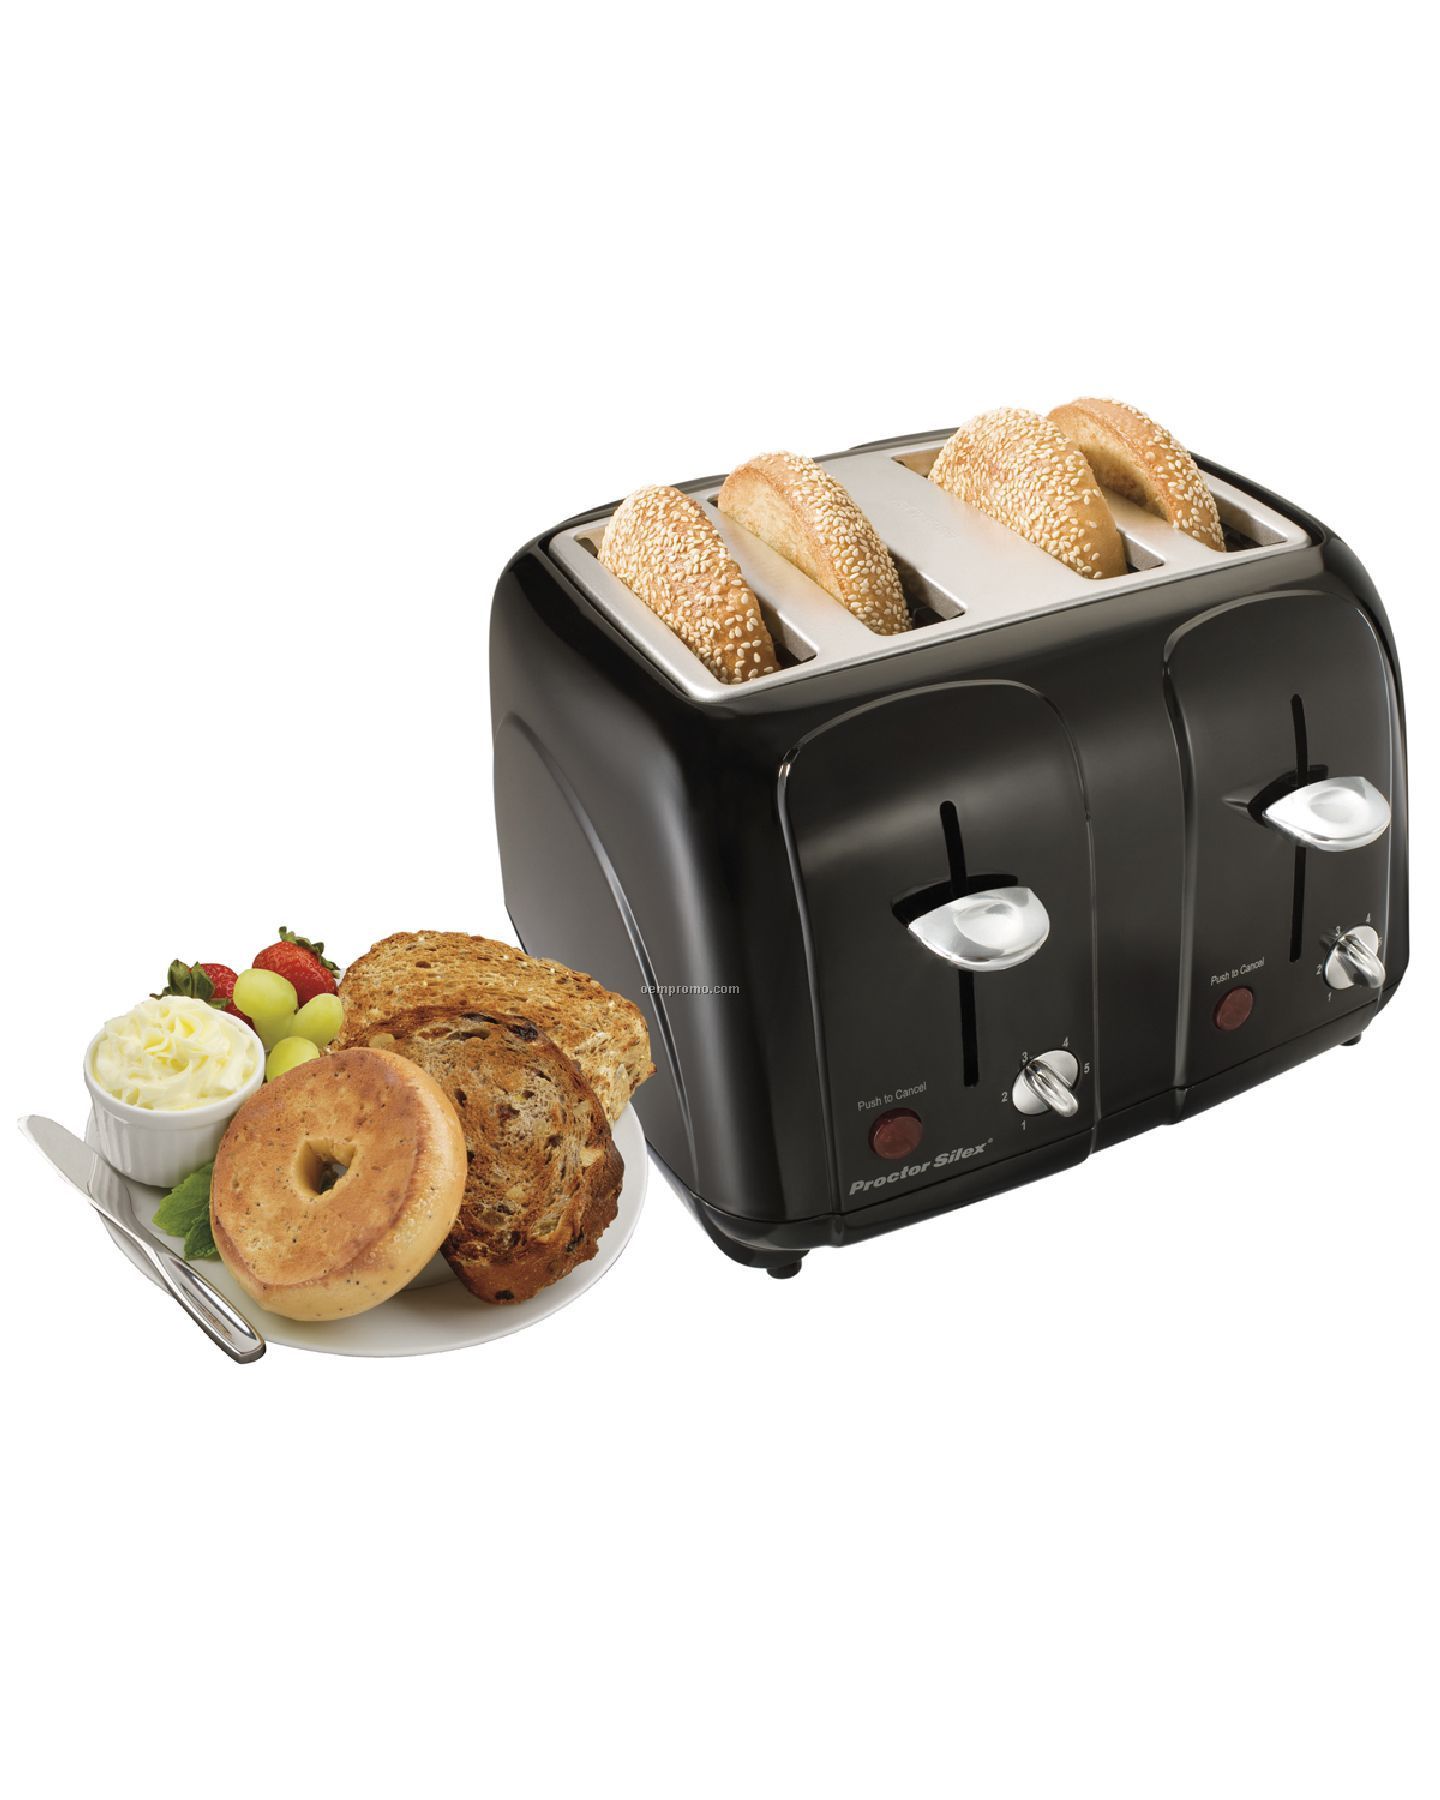 Proctor Silex - Toasters - Blk 4 Slice Cool Touch Toaster